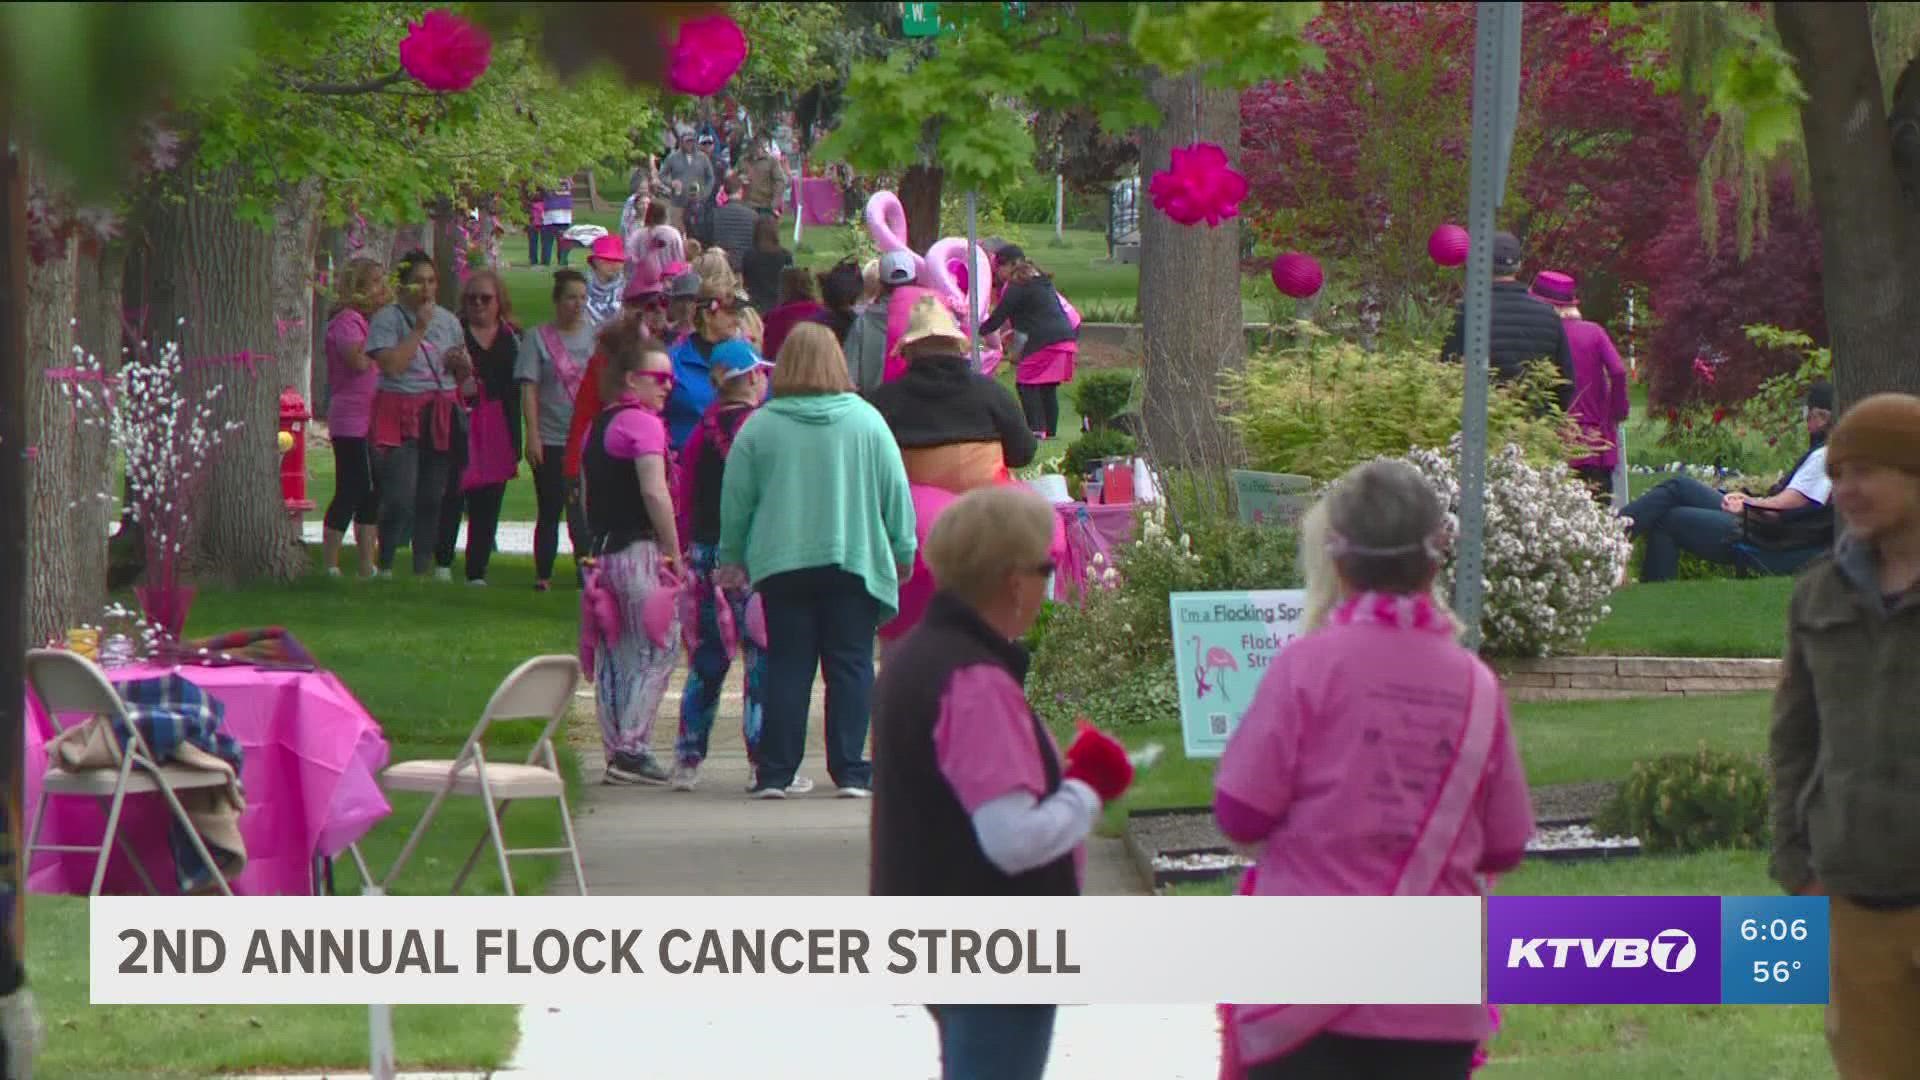 The pink-flamingo-themed walk invites community members to gather and celebrate cancer survivors, or to walk in memory of their loved ones who battled with cancer.